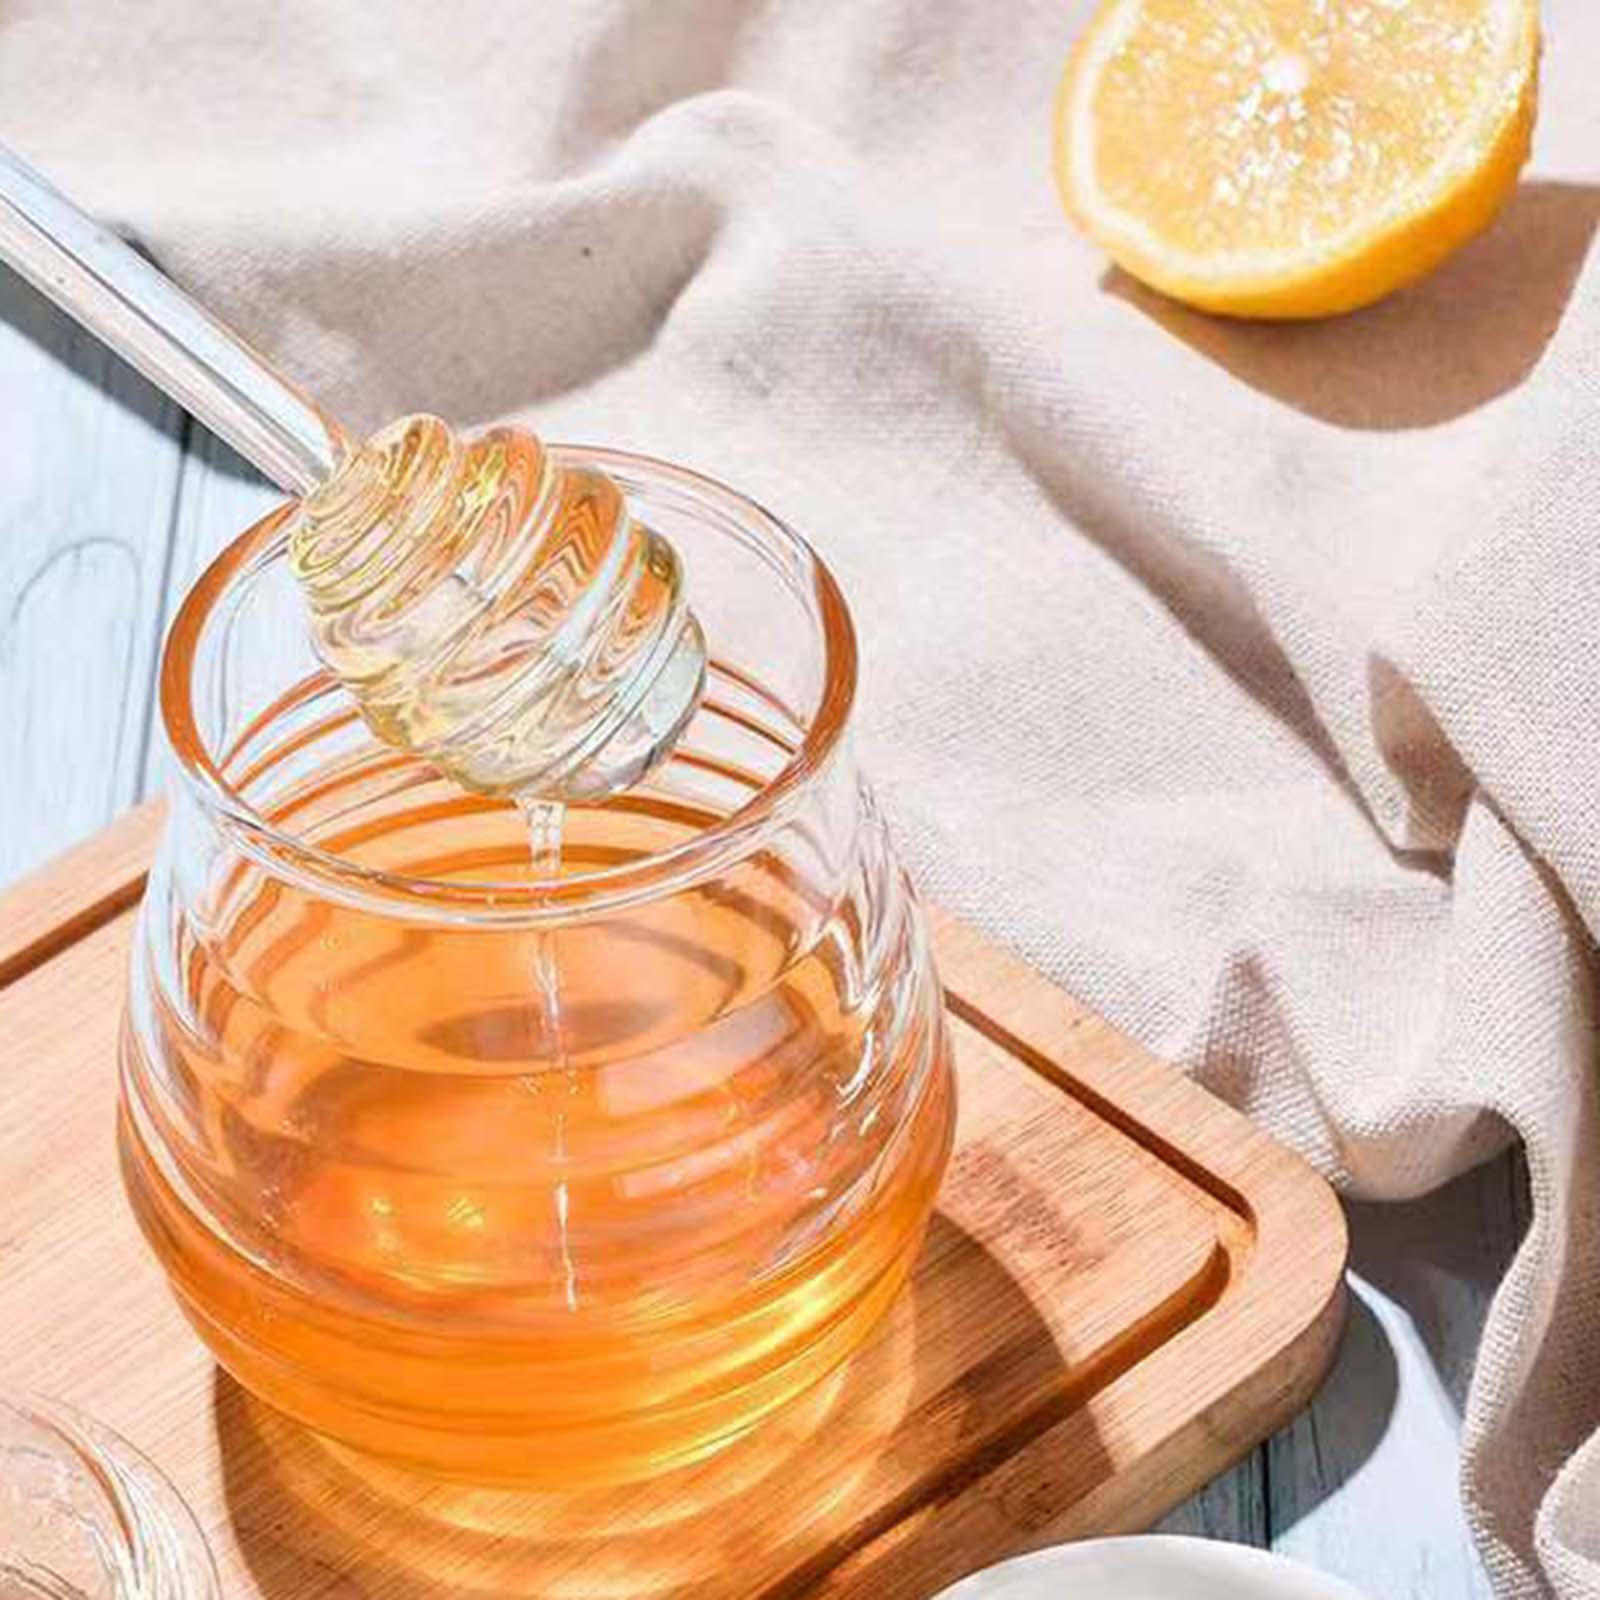 Honey Bee Pot Clear Dispenser Glass Beehive Honey Pot for Syrup Office Home